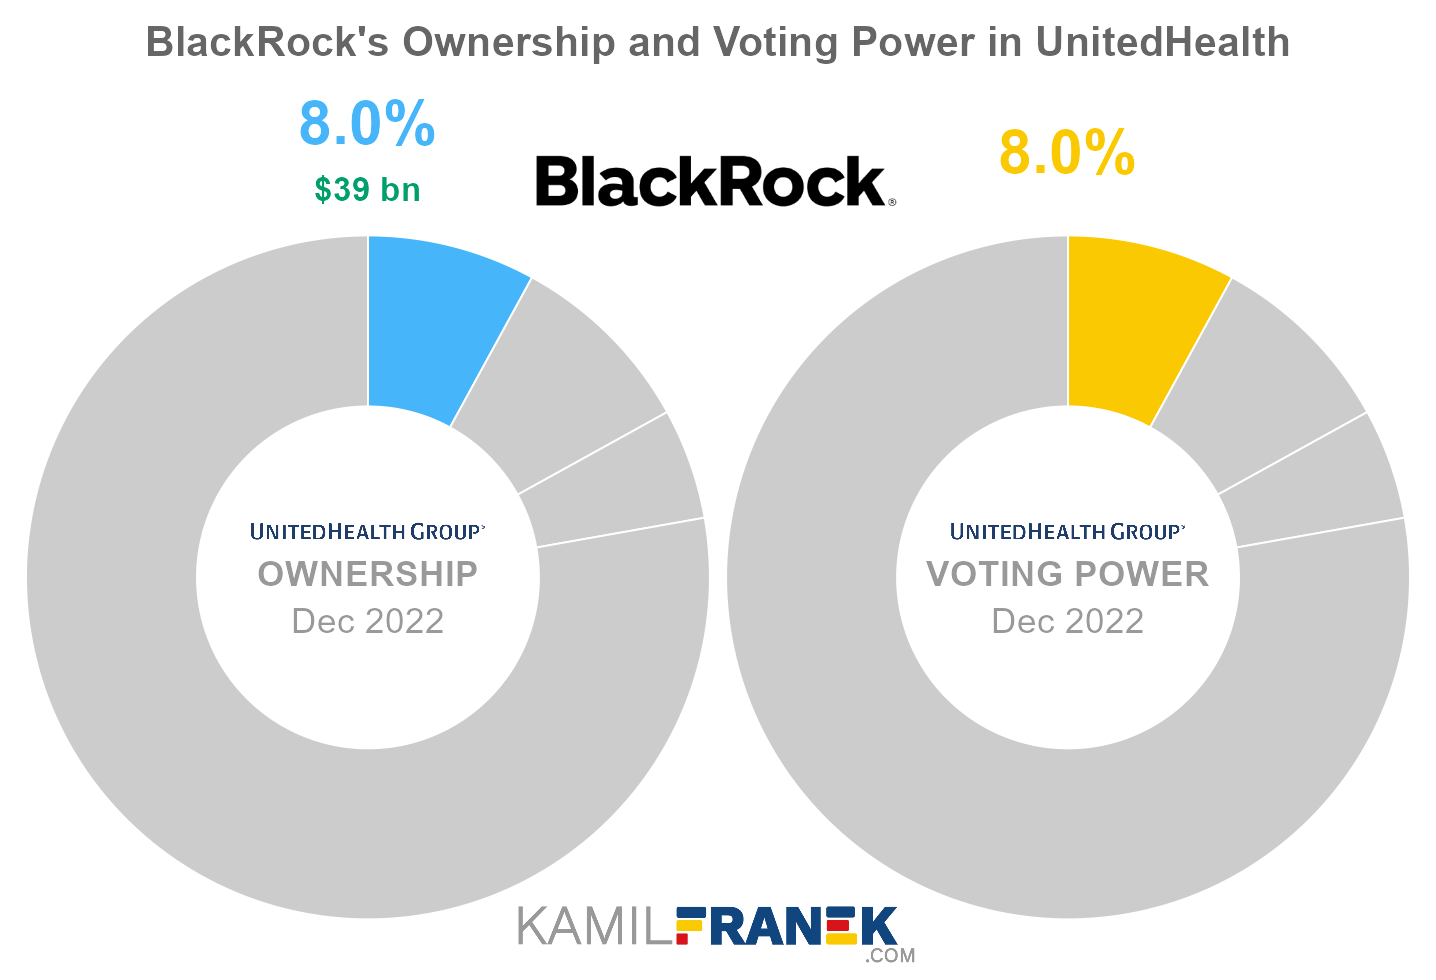 BlackRock's share ownership and voting power in UnitedHealth (chart)